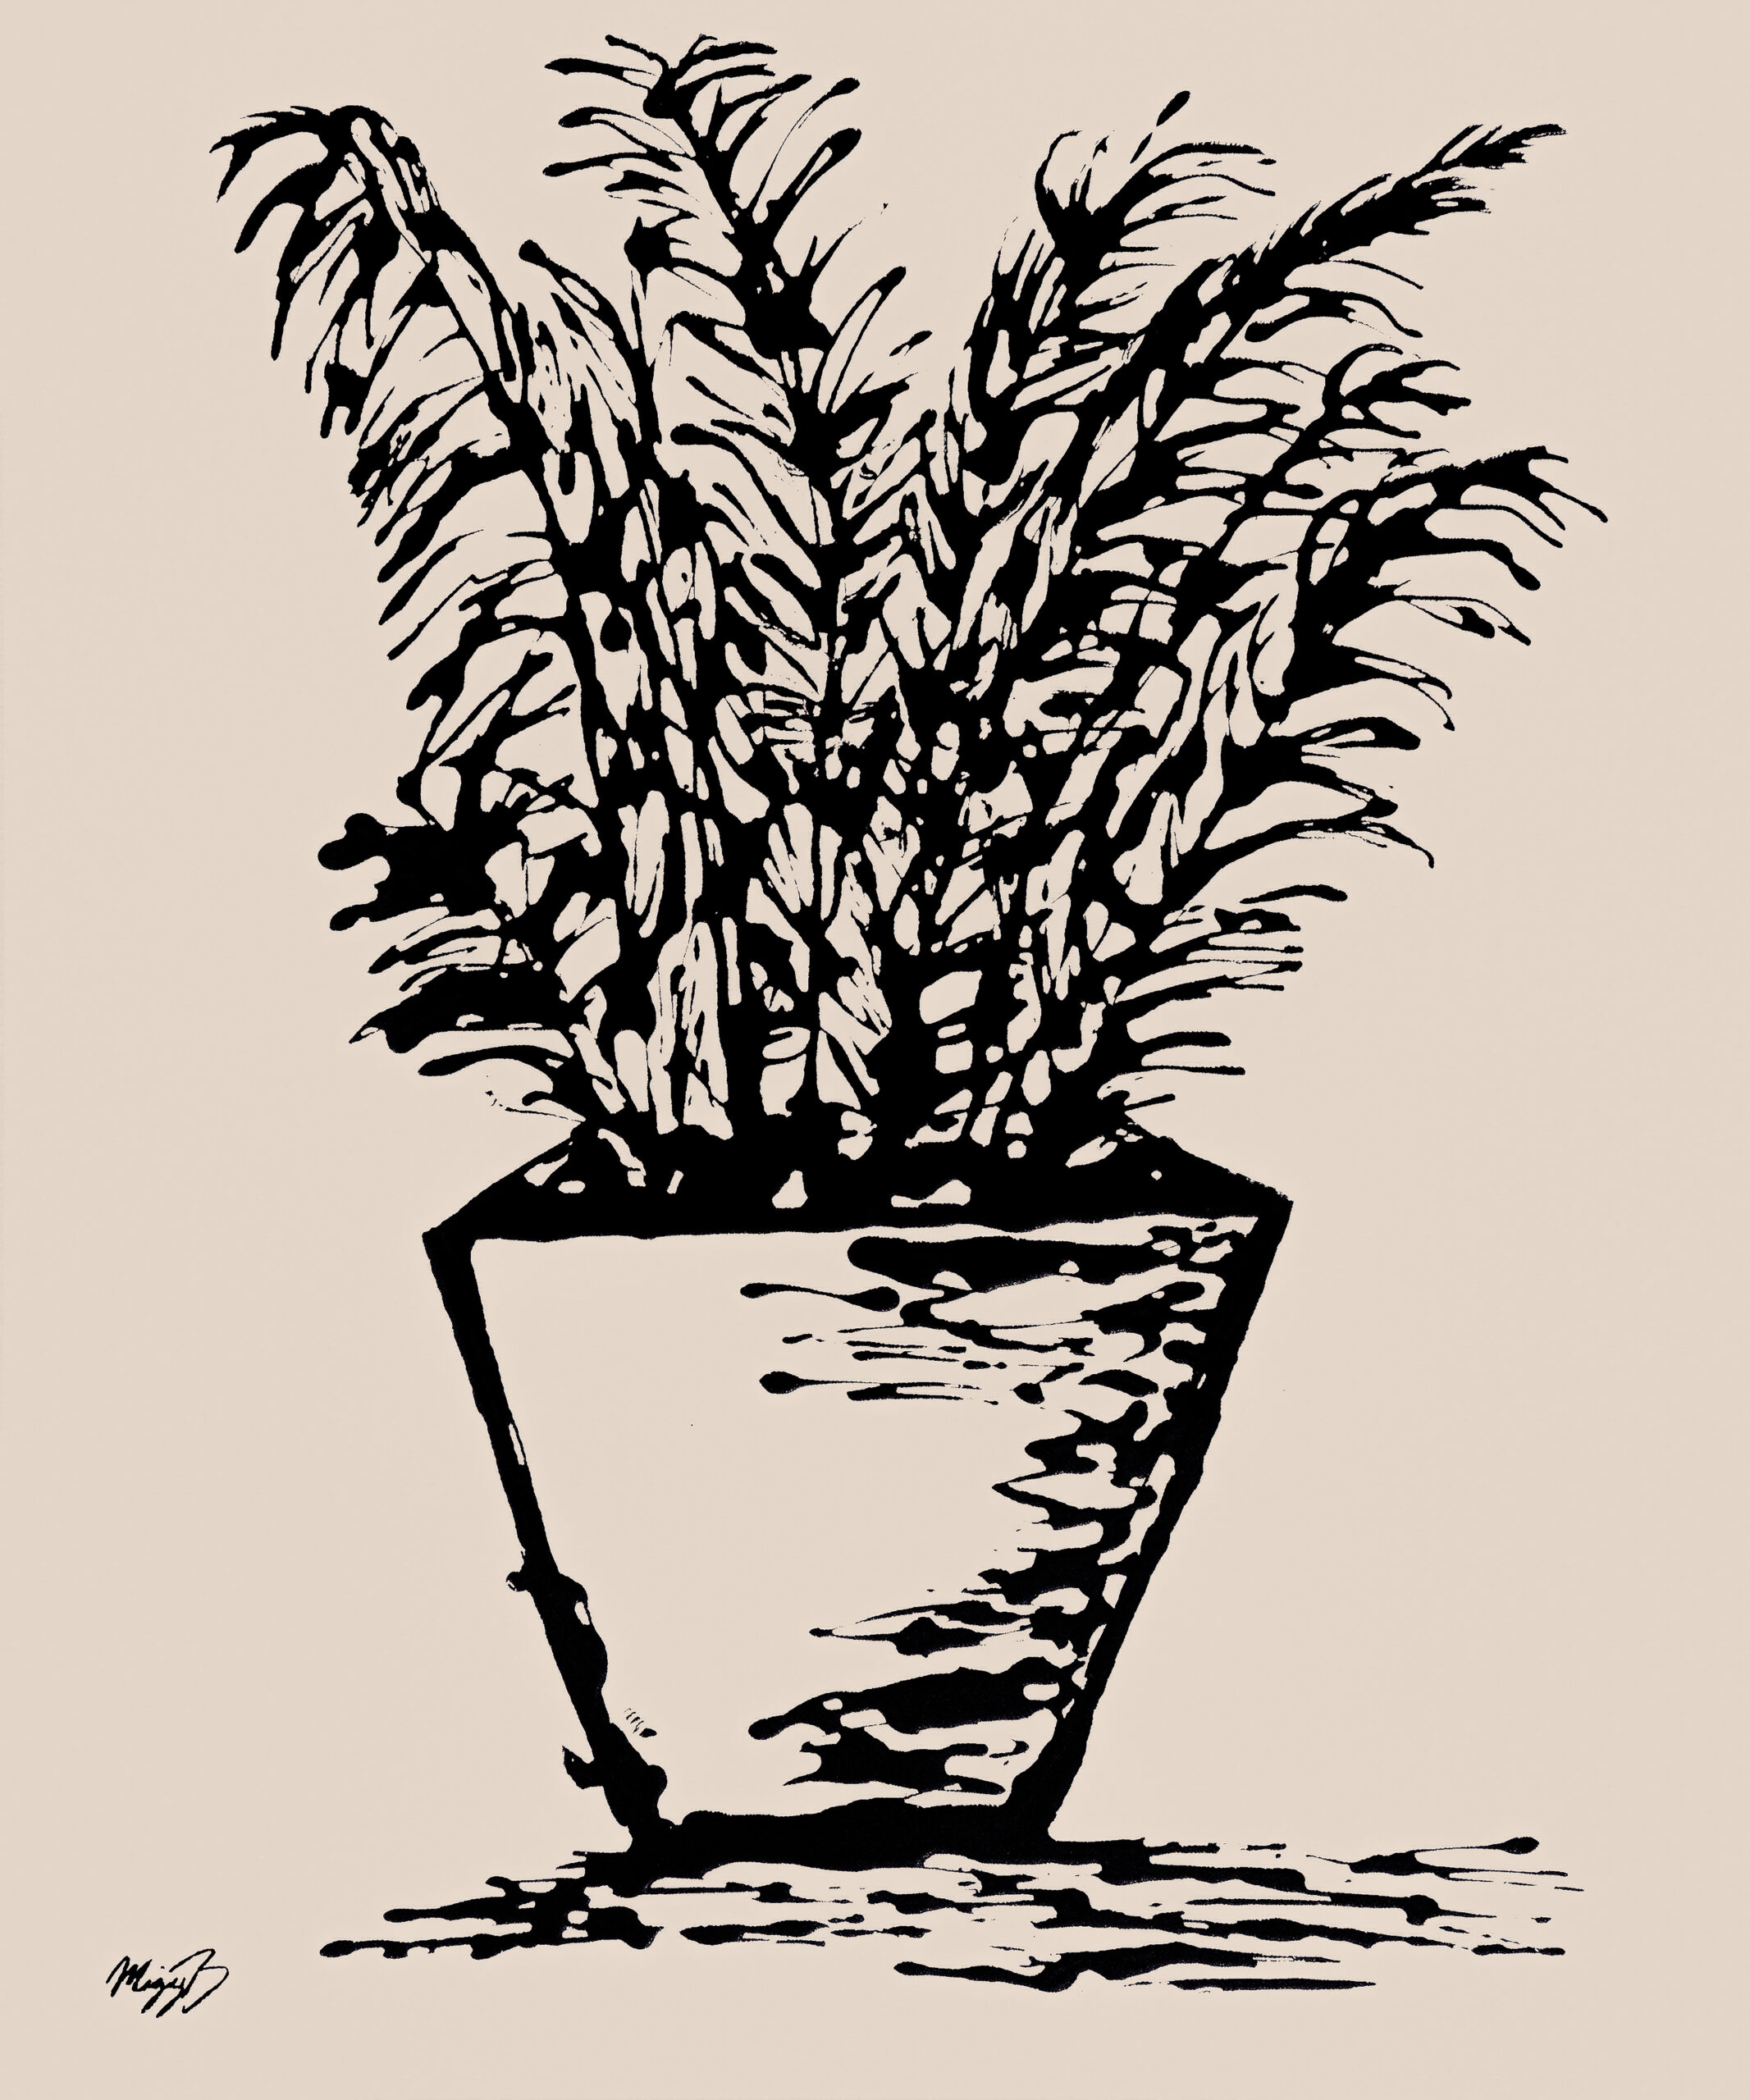 "house plant" by @migybcreative